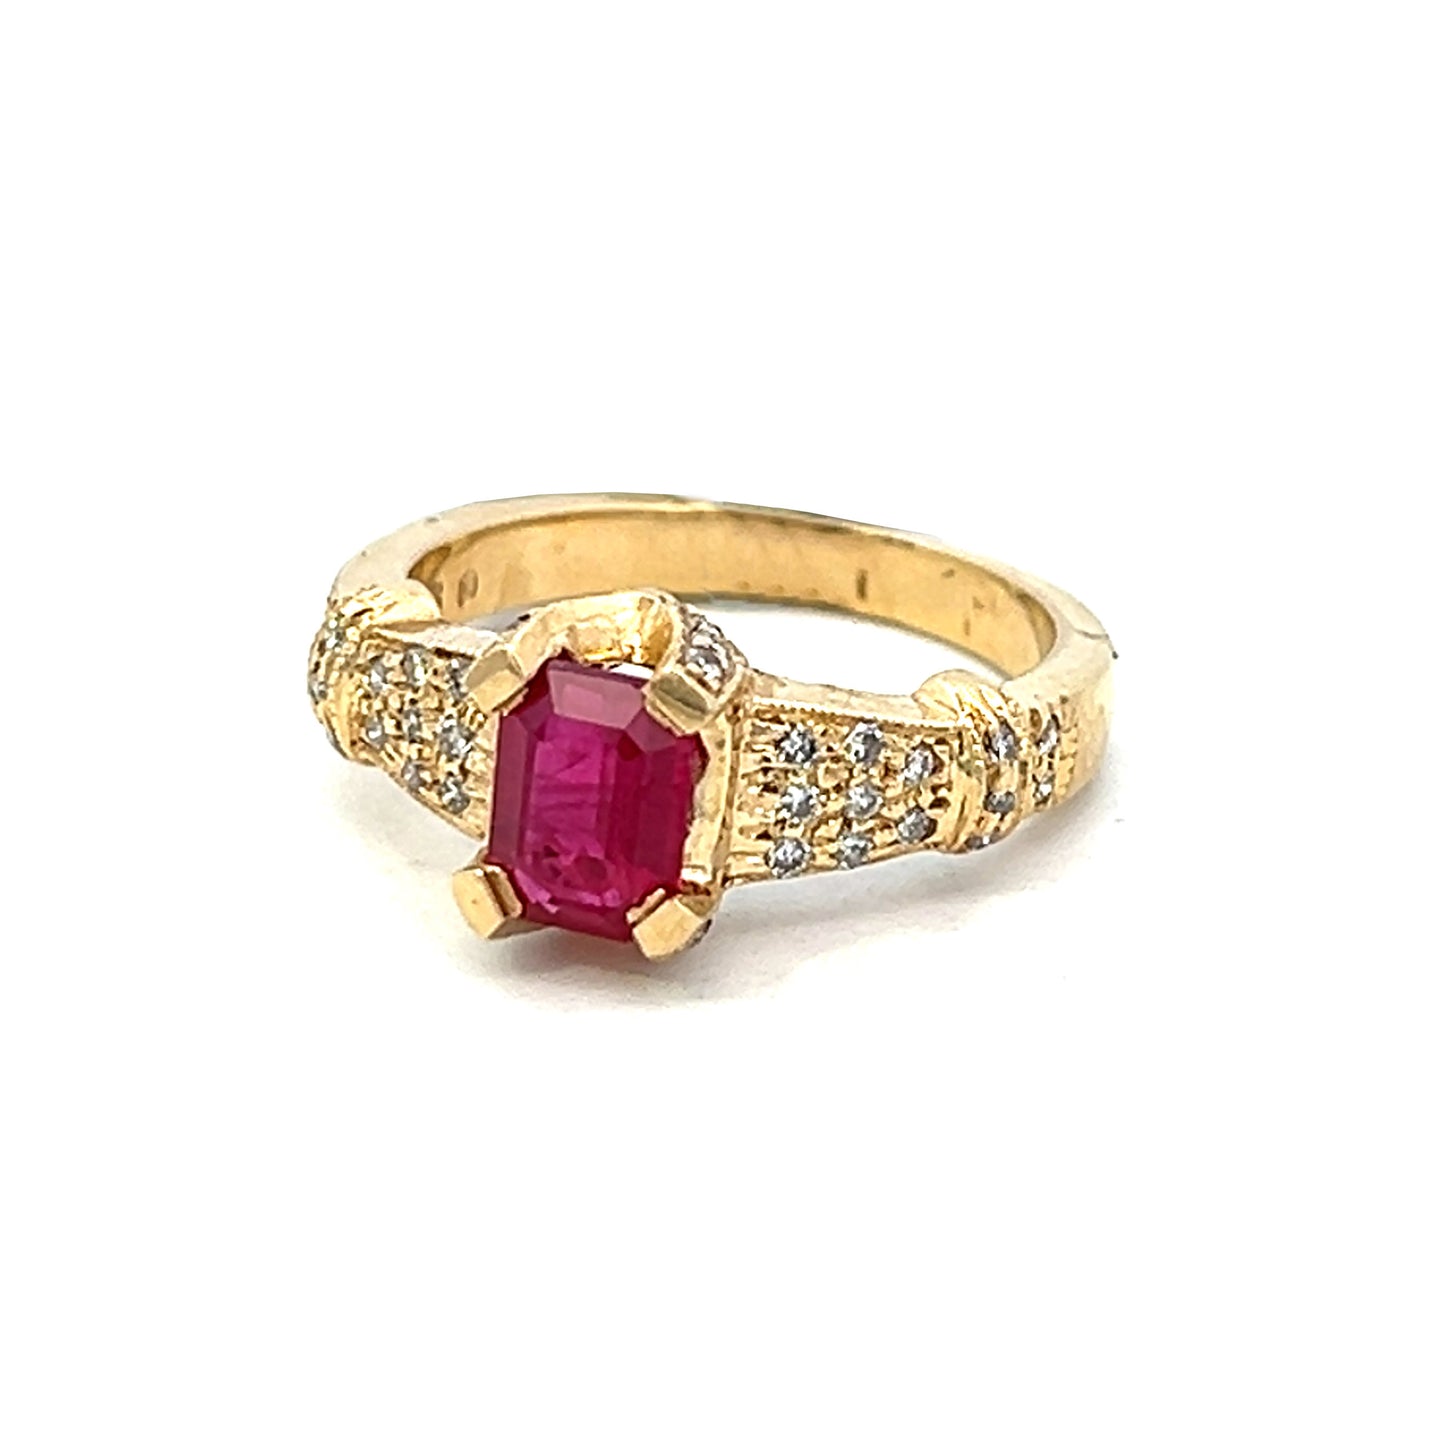 1.62 Gold Ruby Ring | Emerald Cut Ruby Engagement Ring | Ruby Ring 14k